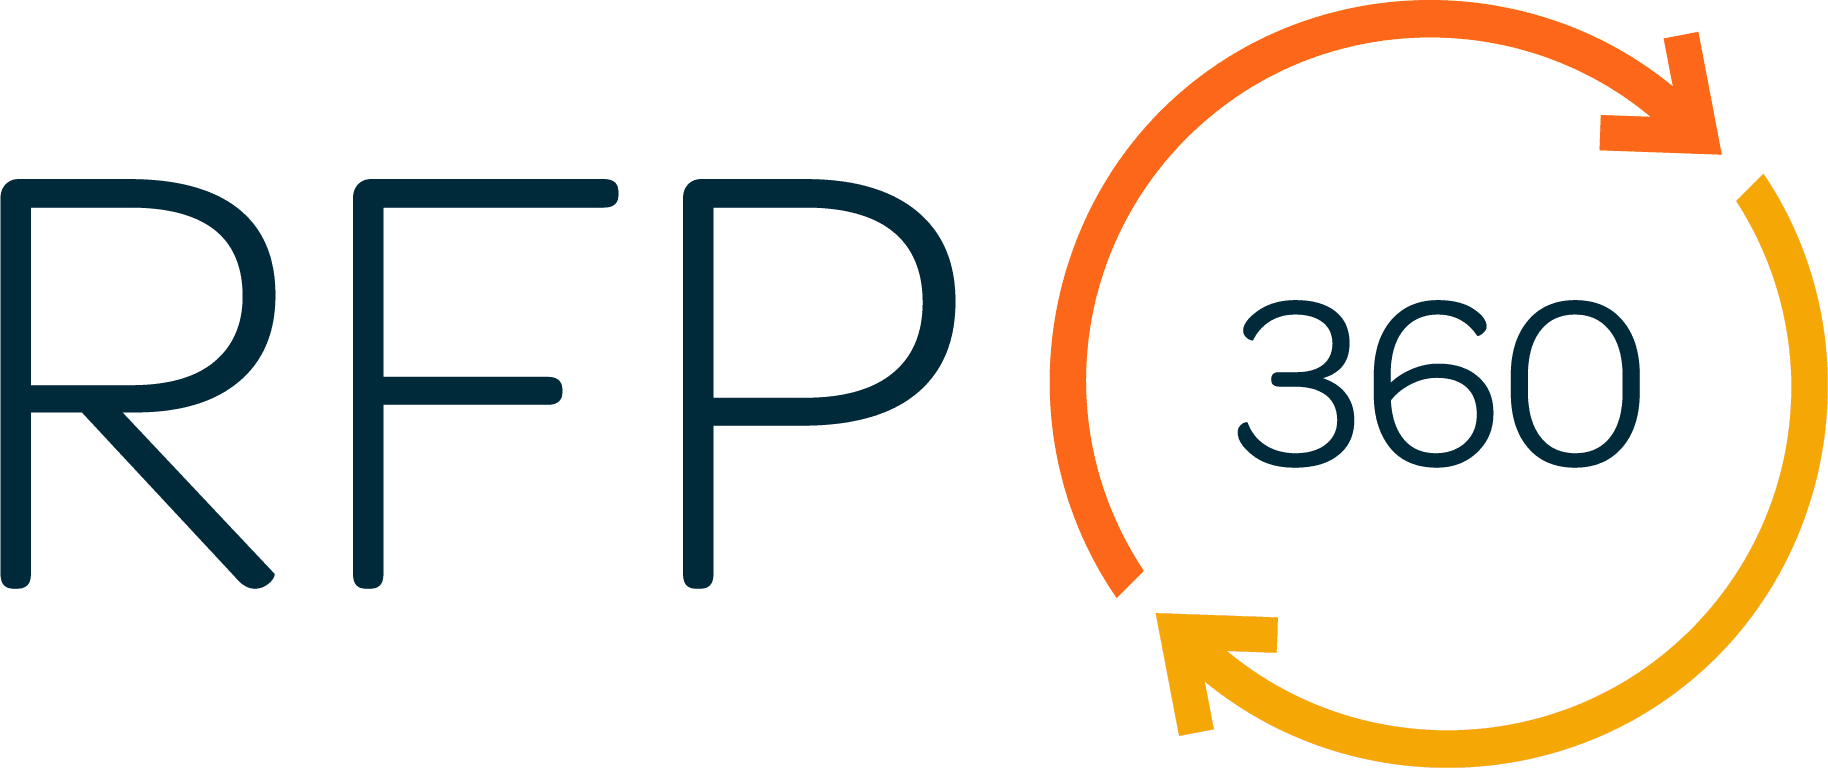 RFP360 secures secon